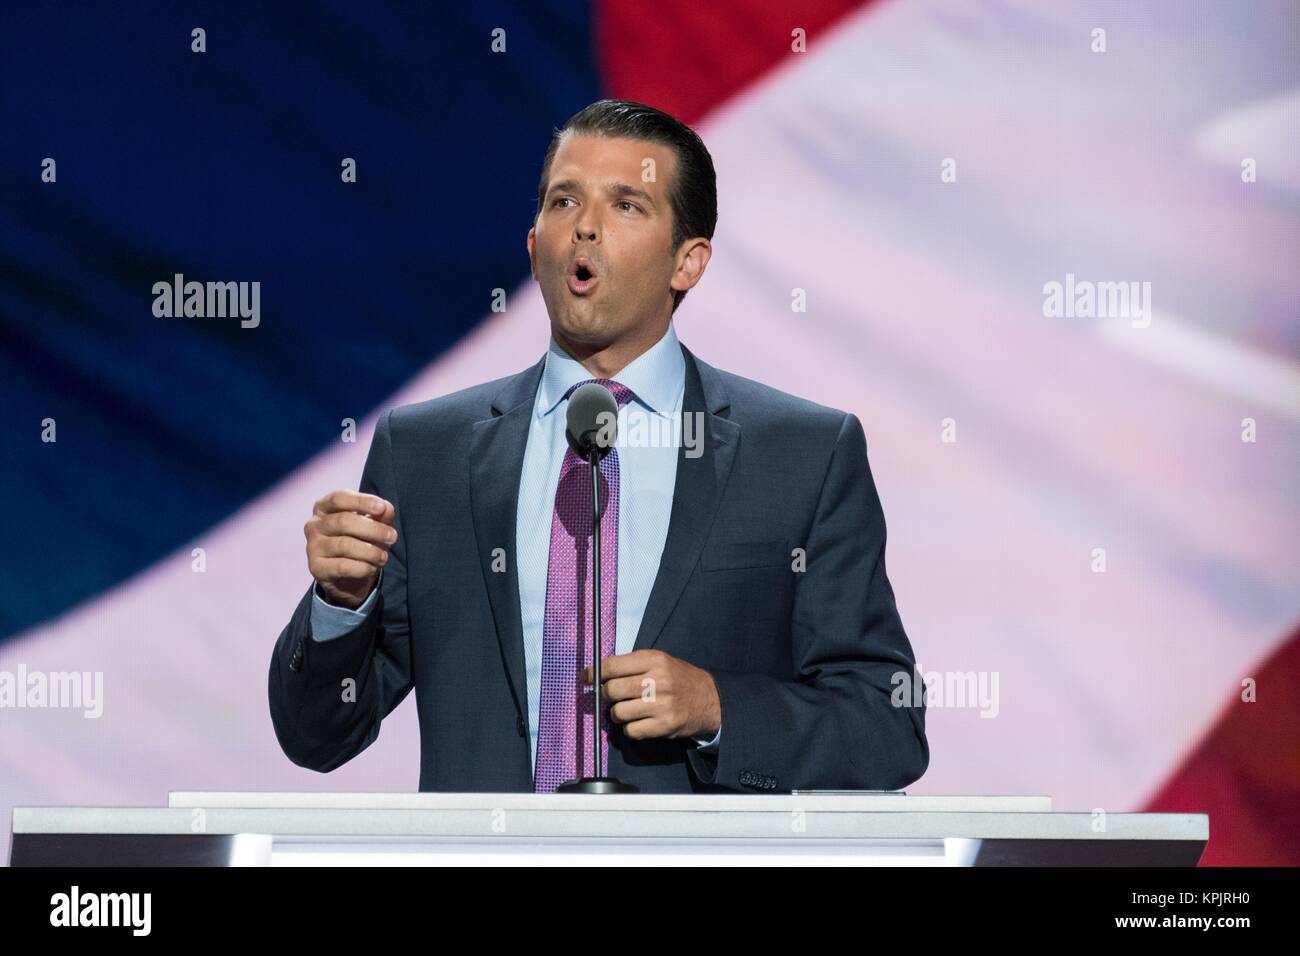 Donald Trump, Jr. son of Donald Trump and his first wife Ivana Trump, addresses delegates on the second day of the Republican National Convention July 19, 2016 in Cleveland, Ohio. Earlier in the day the delegates formally nominated Donald J. Trump for president. Stock Photo